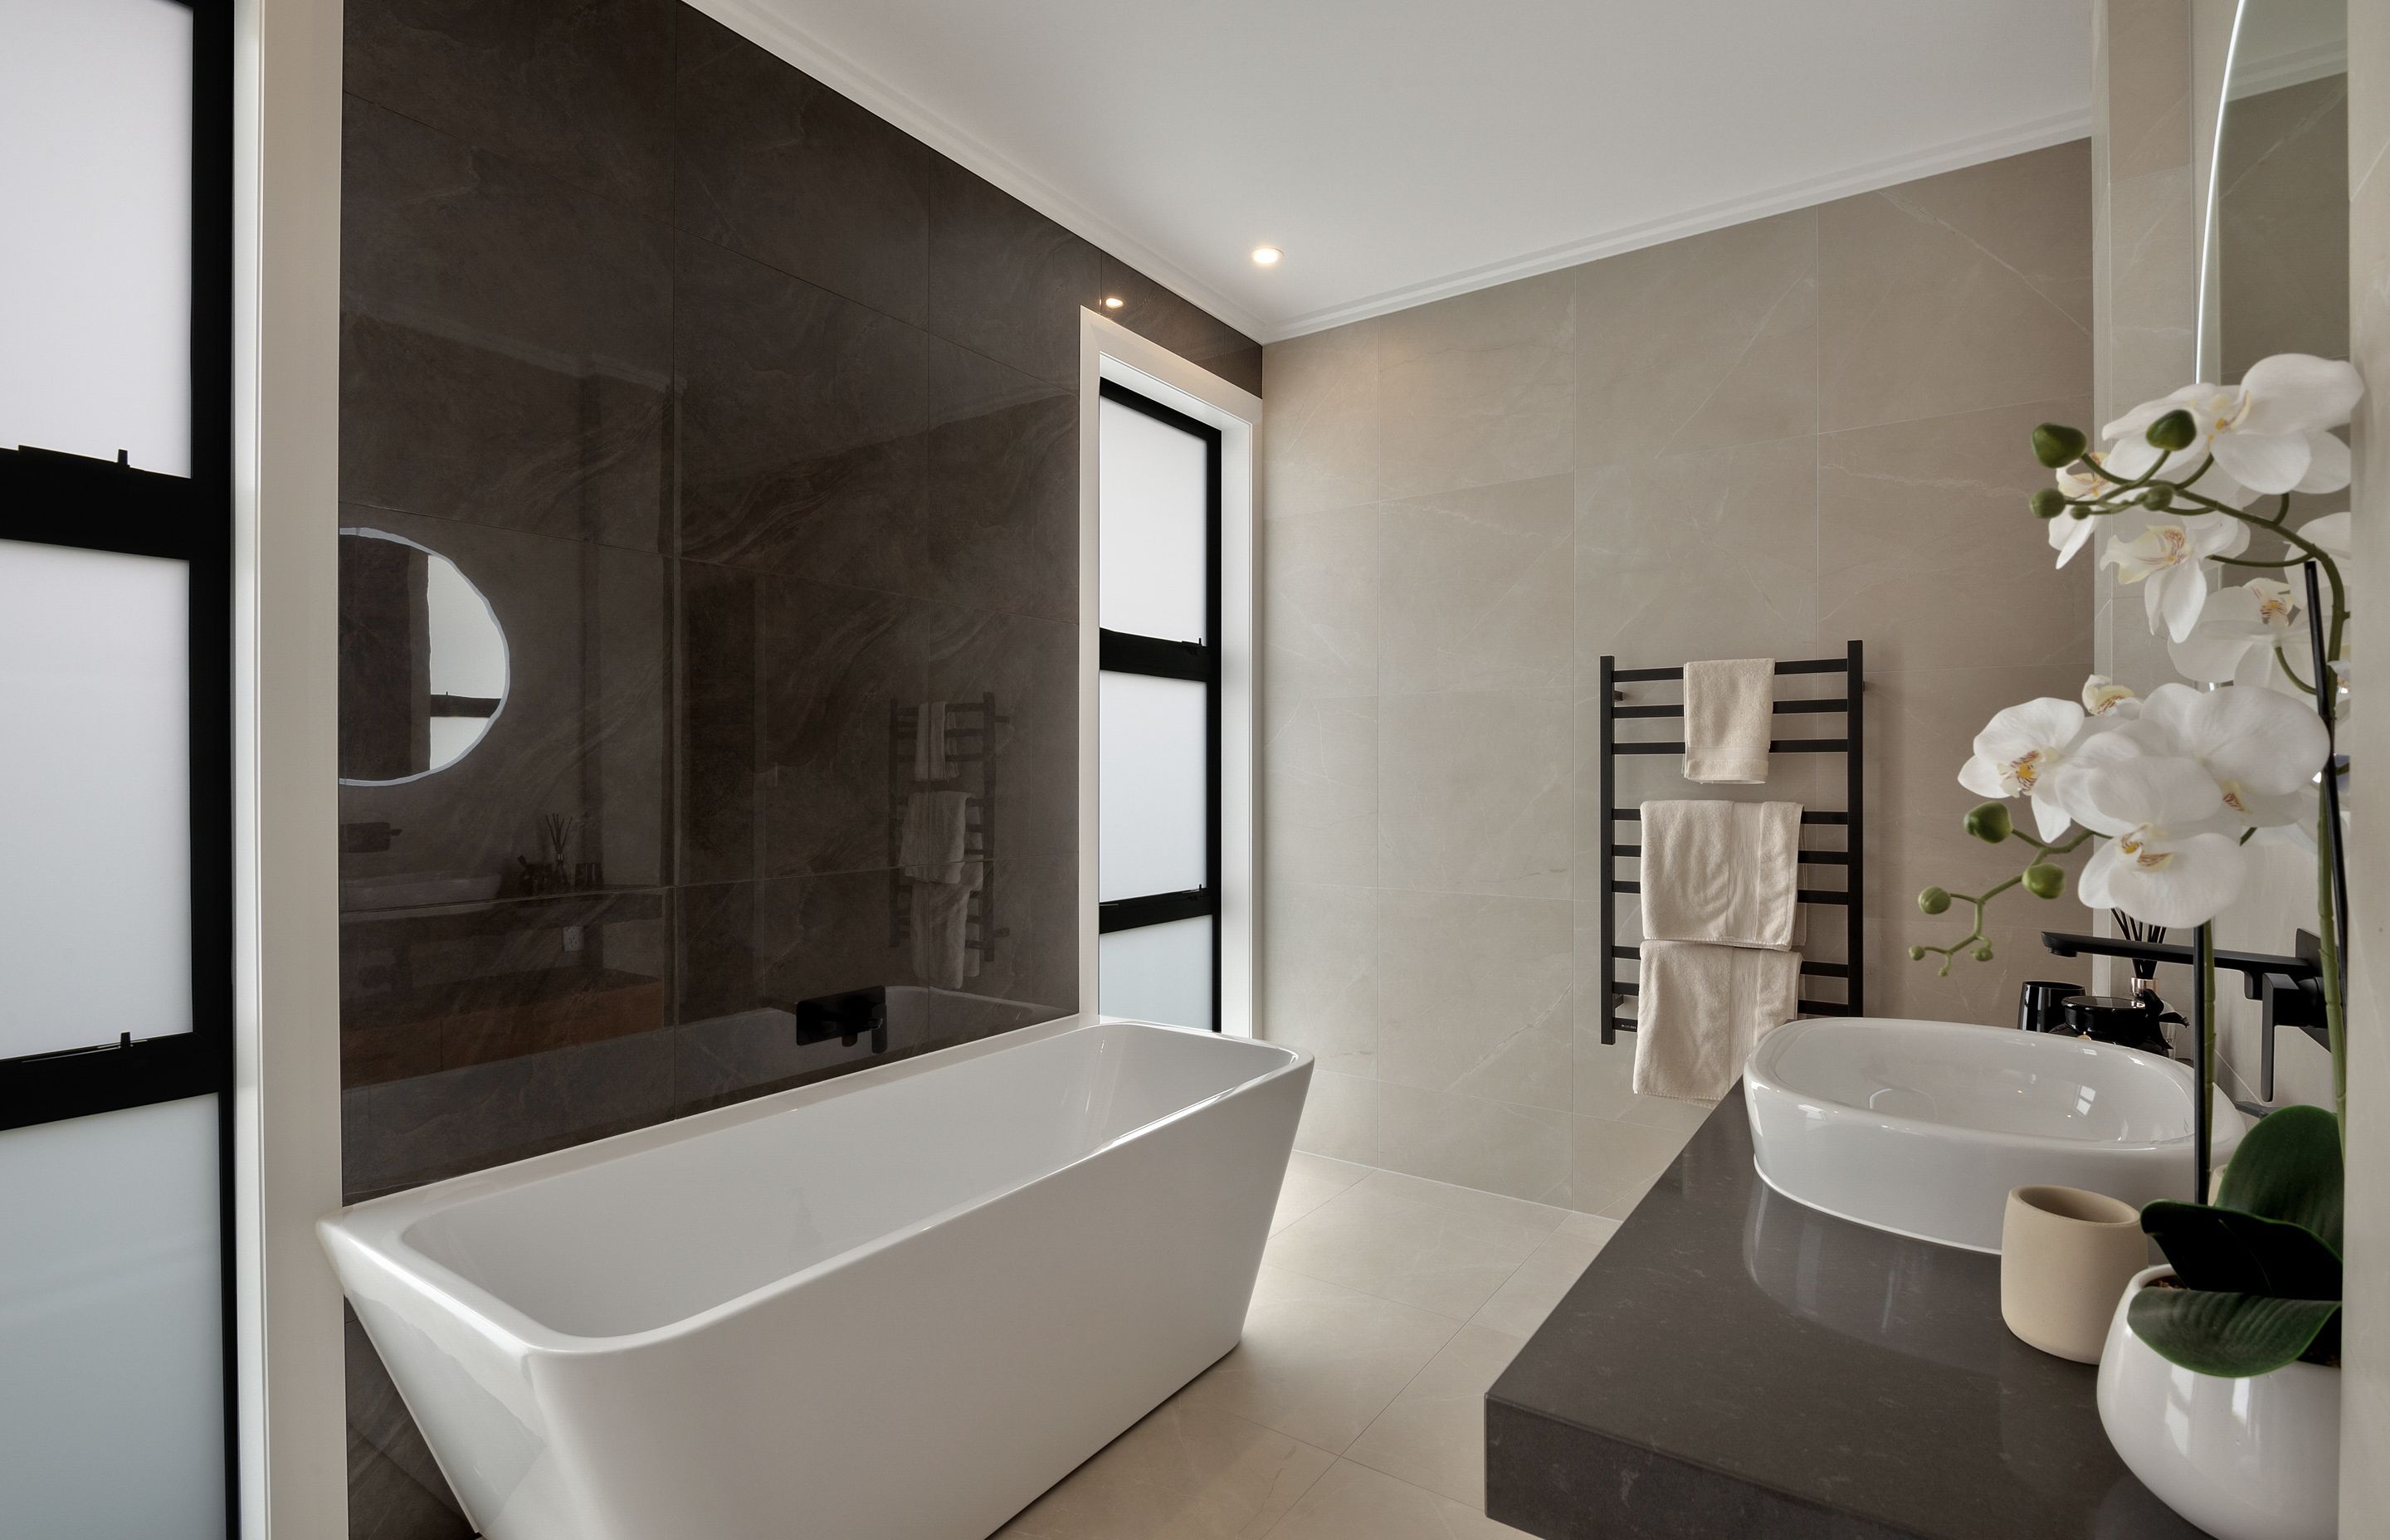 A freestanding bath is the feature piece of one of the bathrooms.